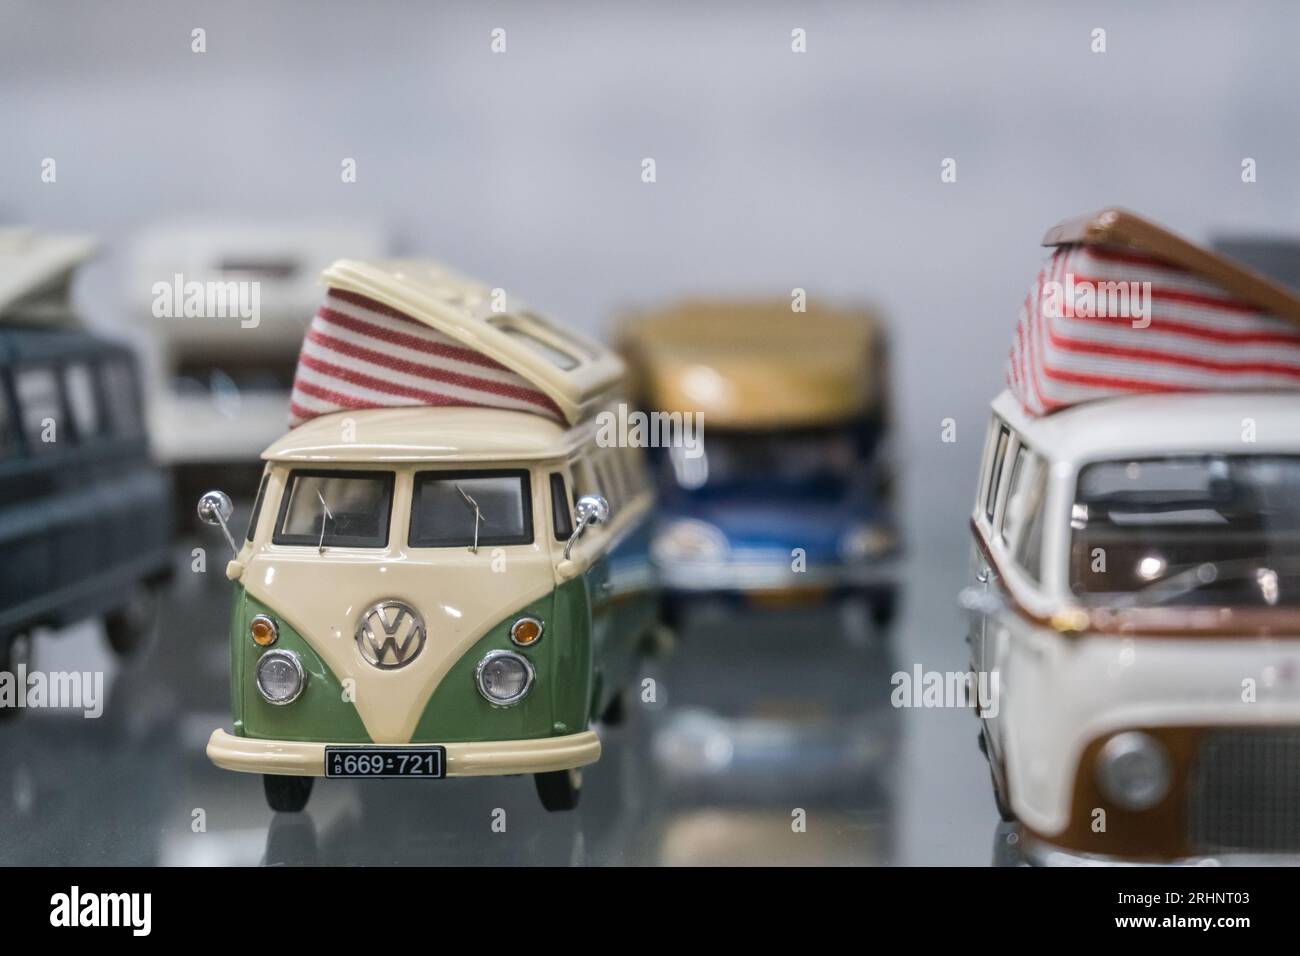 Toy or model  Volkswagen vans with pop-up tops for camping on display. Stock Photo